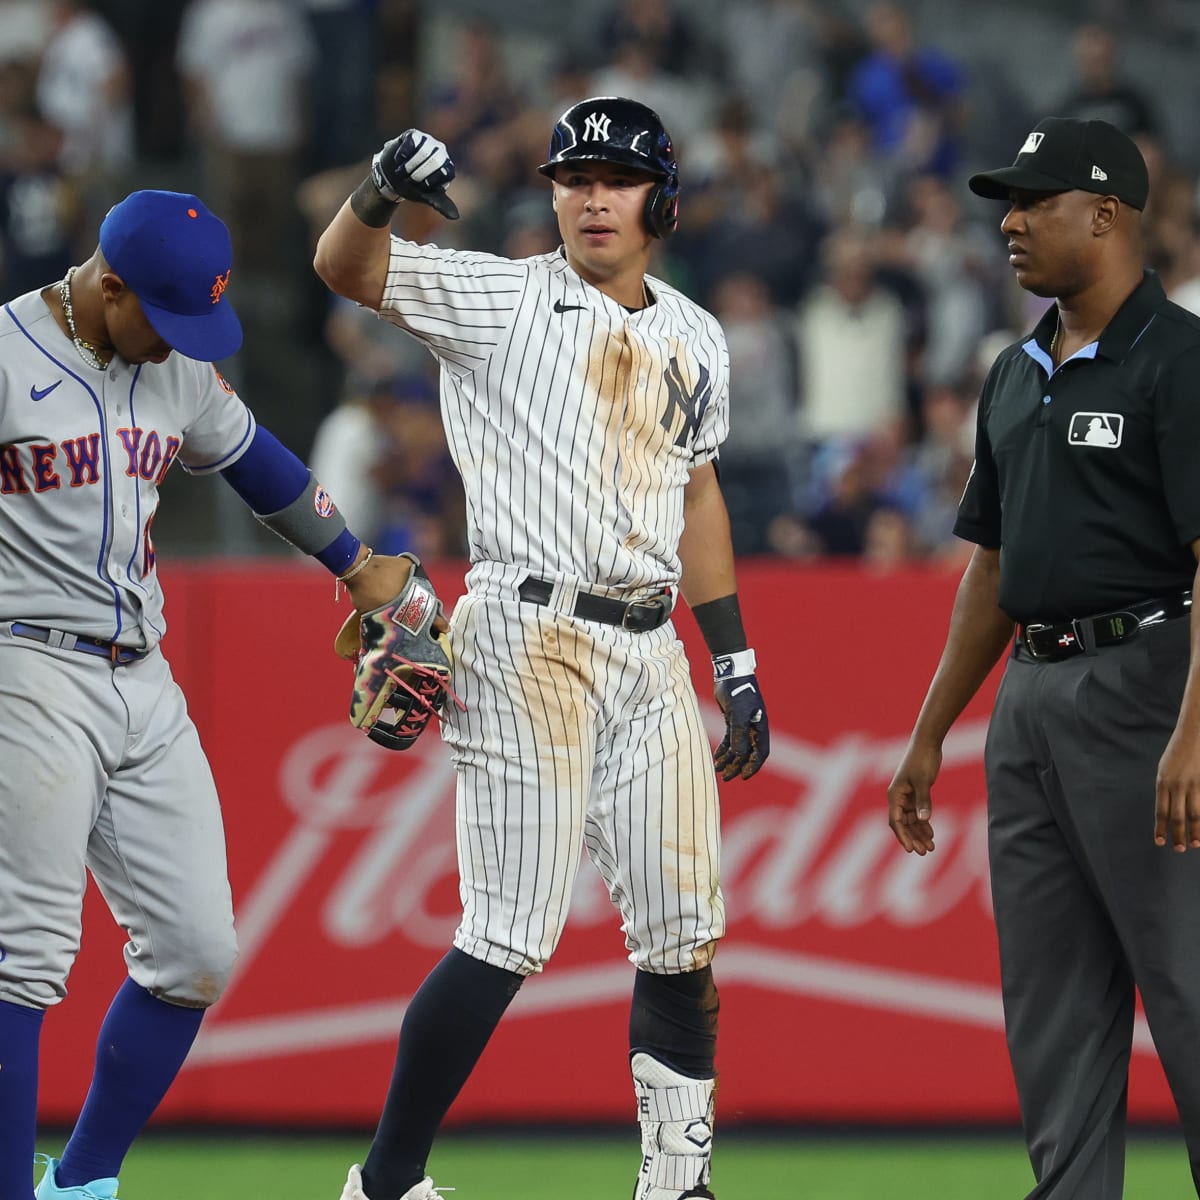 Yankees, Mets Flirting With History as New York Teams Fight to Stay Out of  Last Place - Fastball